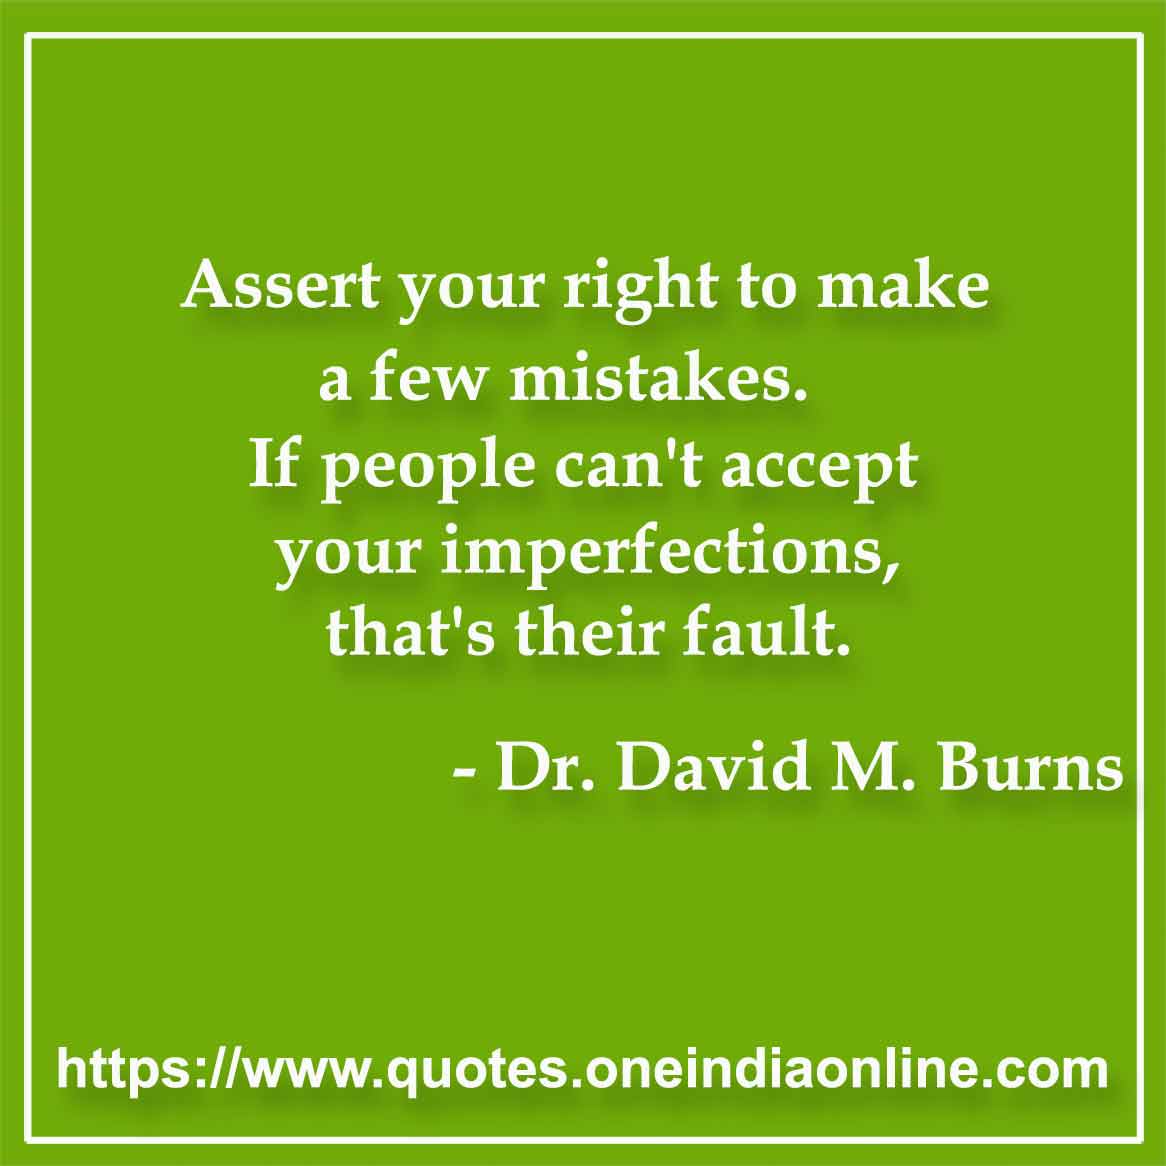 Assert your right to make a few mistakes. If people can't accept your imperfections, that's their fault.

- Mistake Quotes by Dr. David M. Burns 